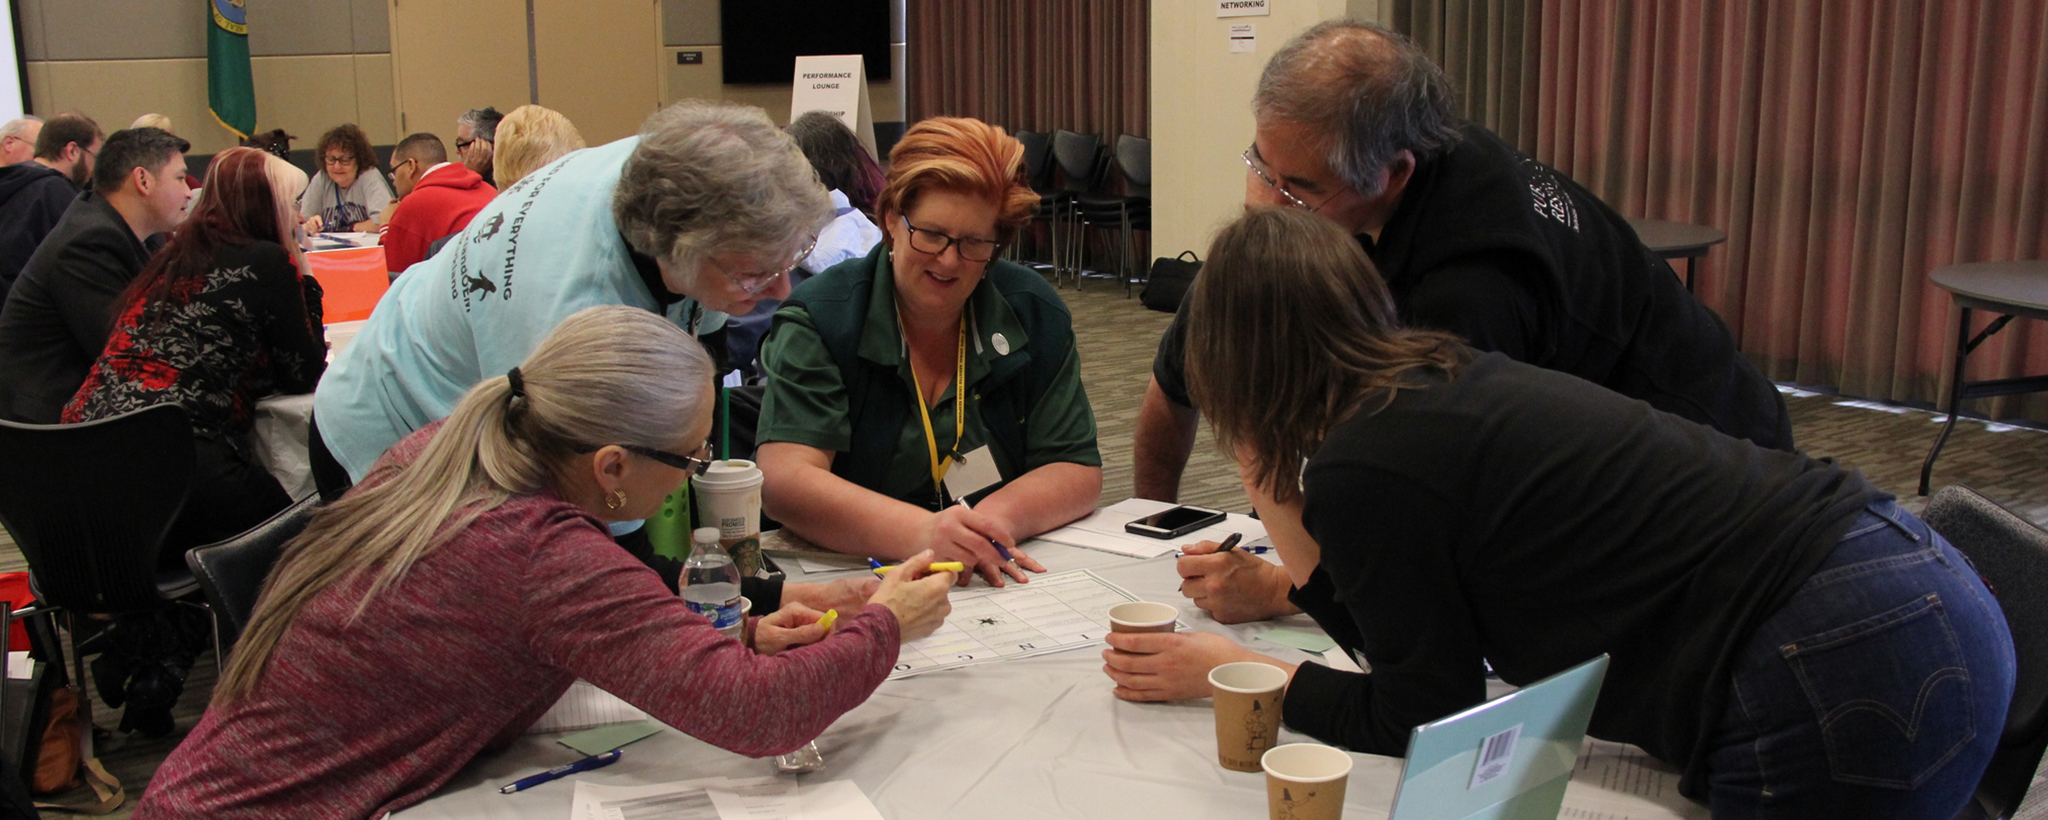 Six CERT members surrounding a table to work on an activity together